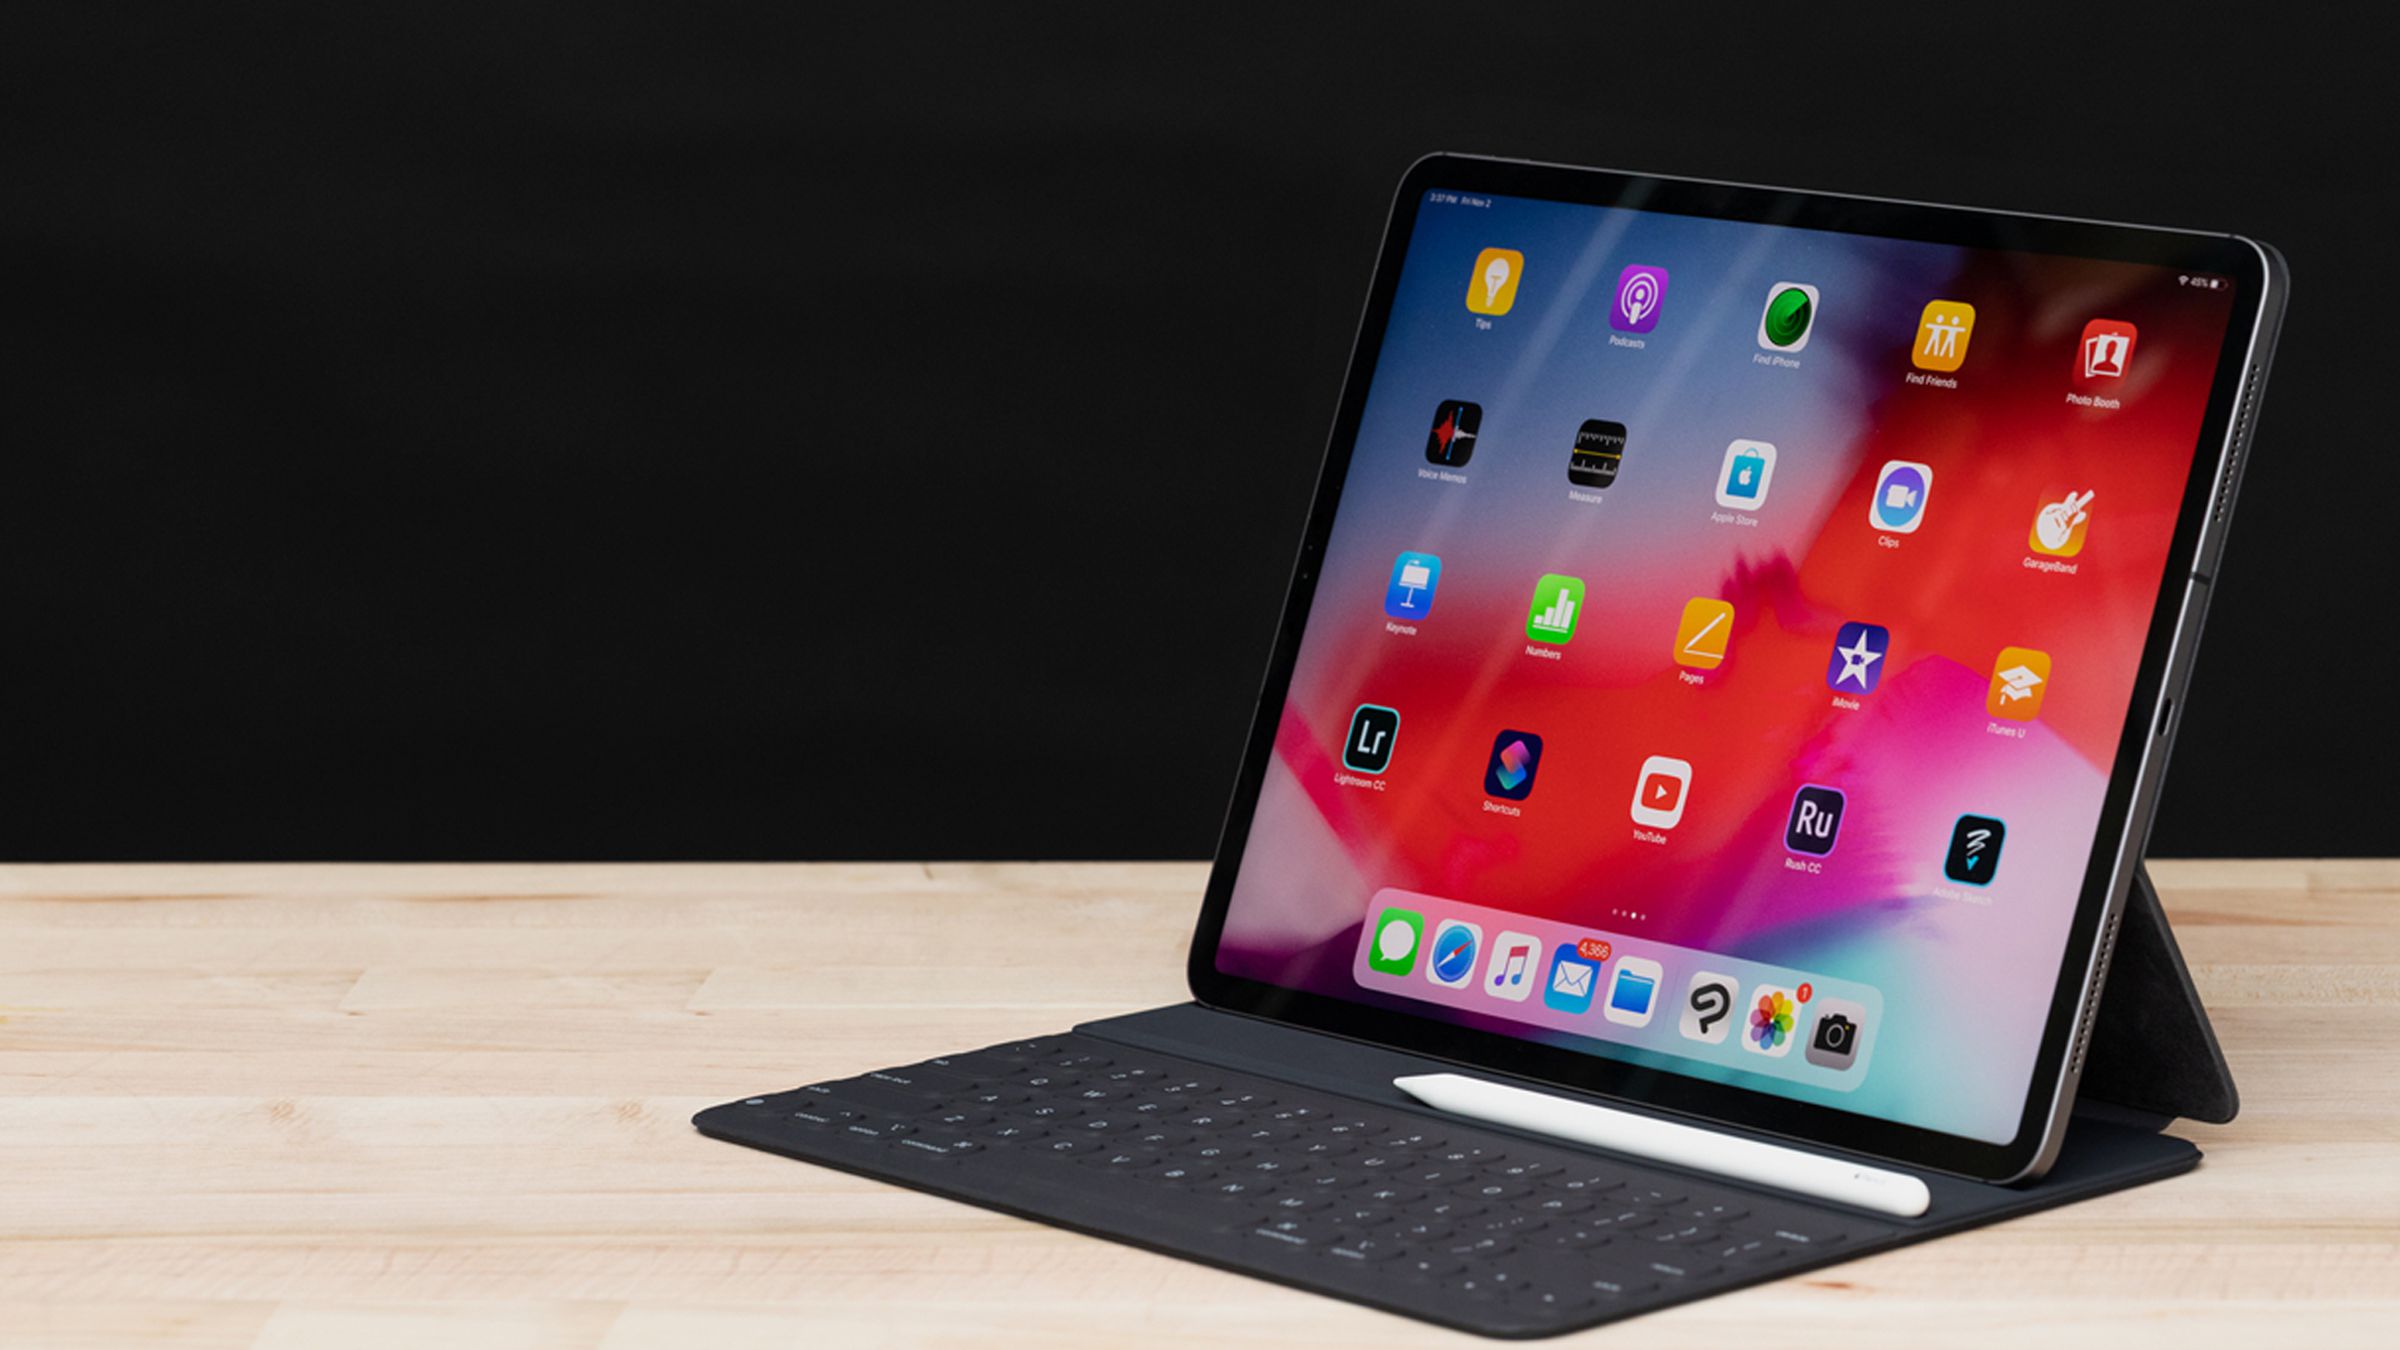 The 2018 iPad Pro, powered by iOS